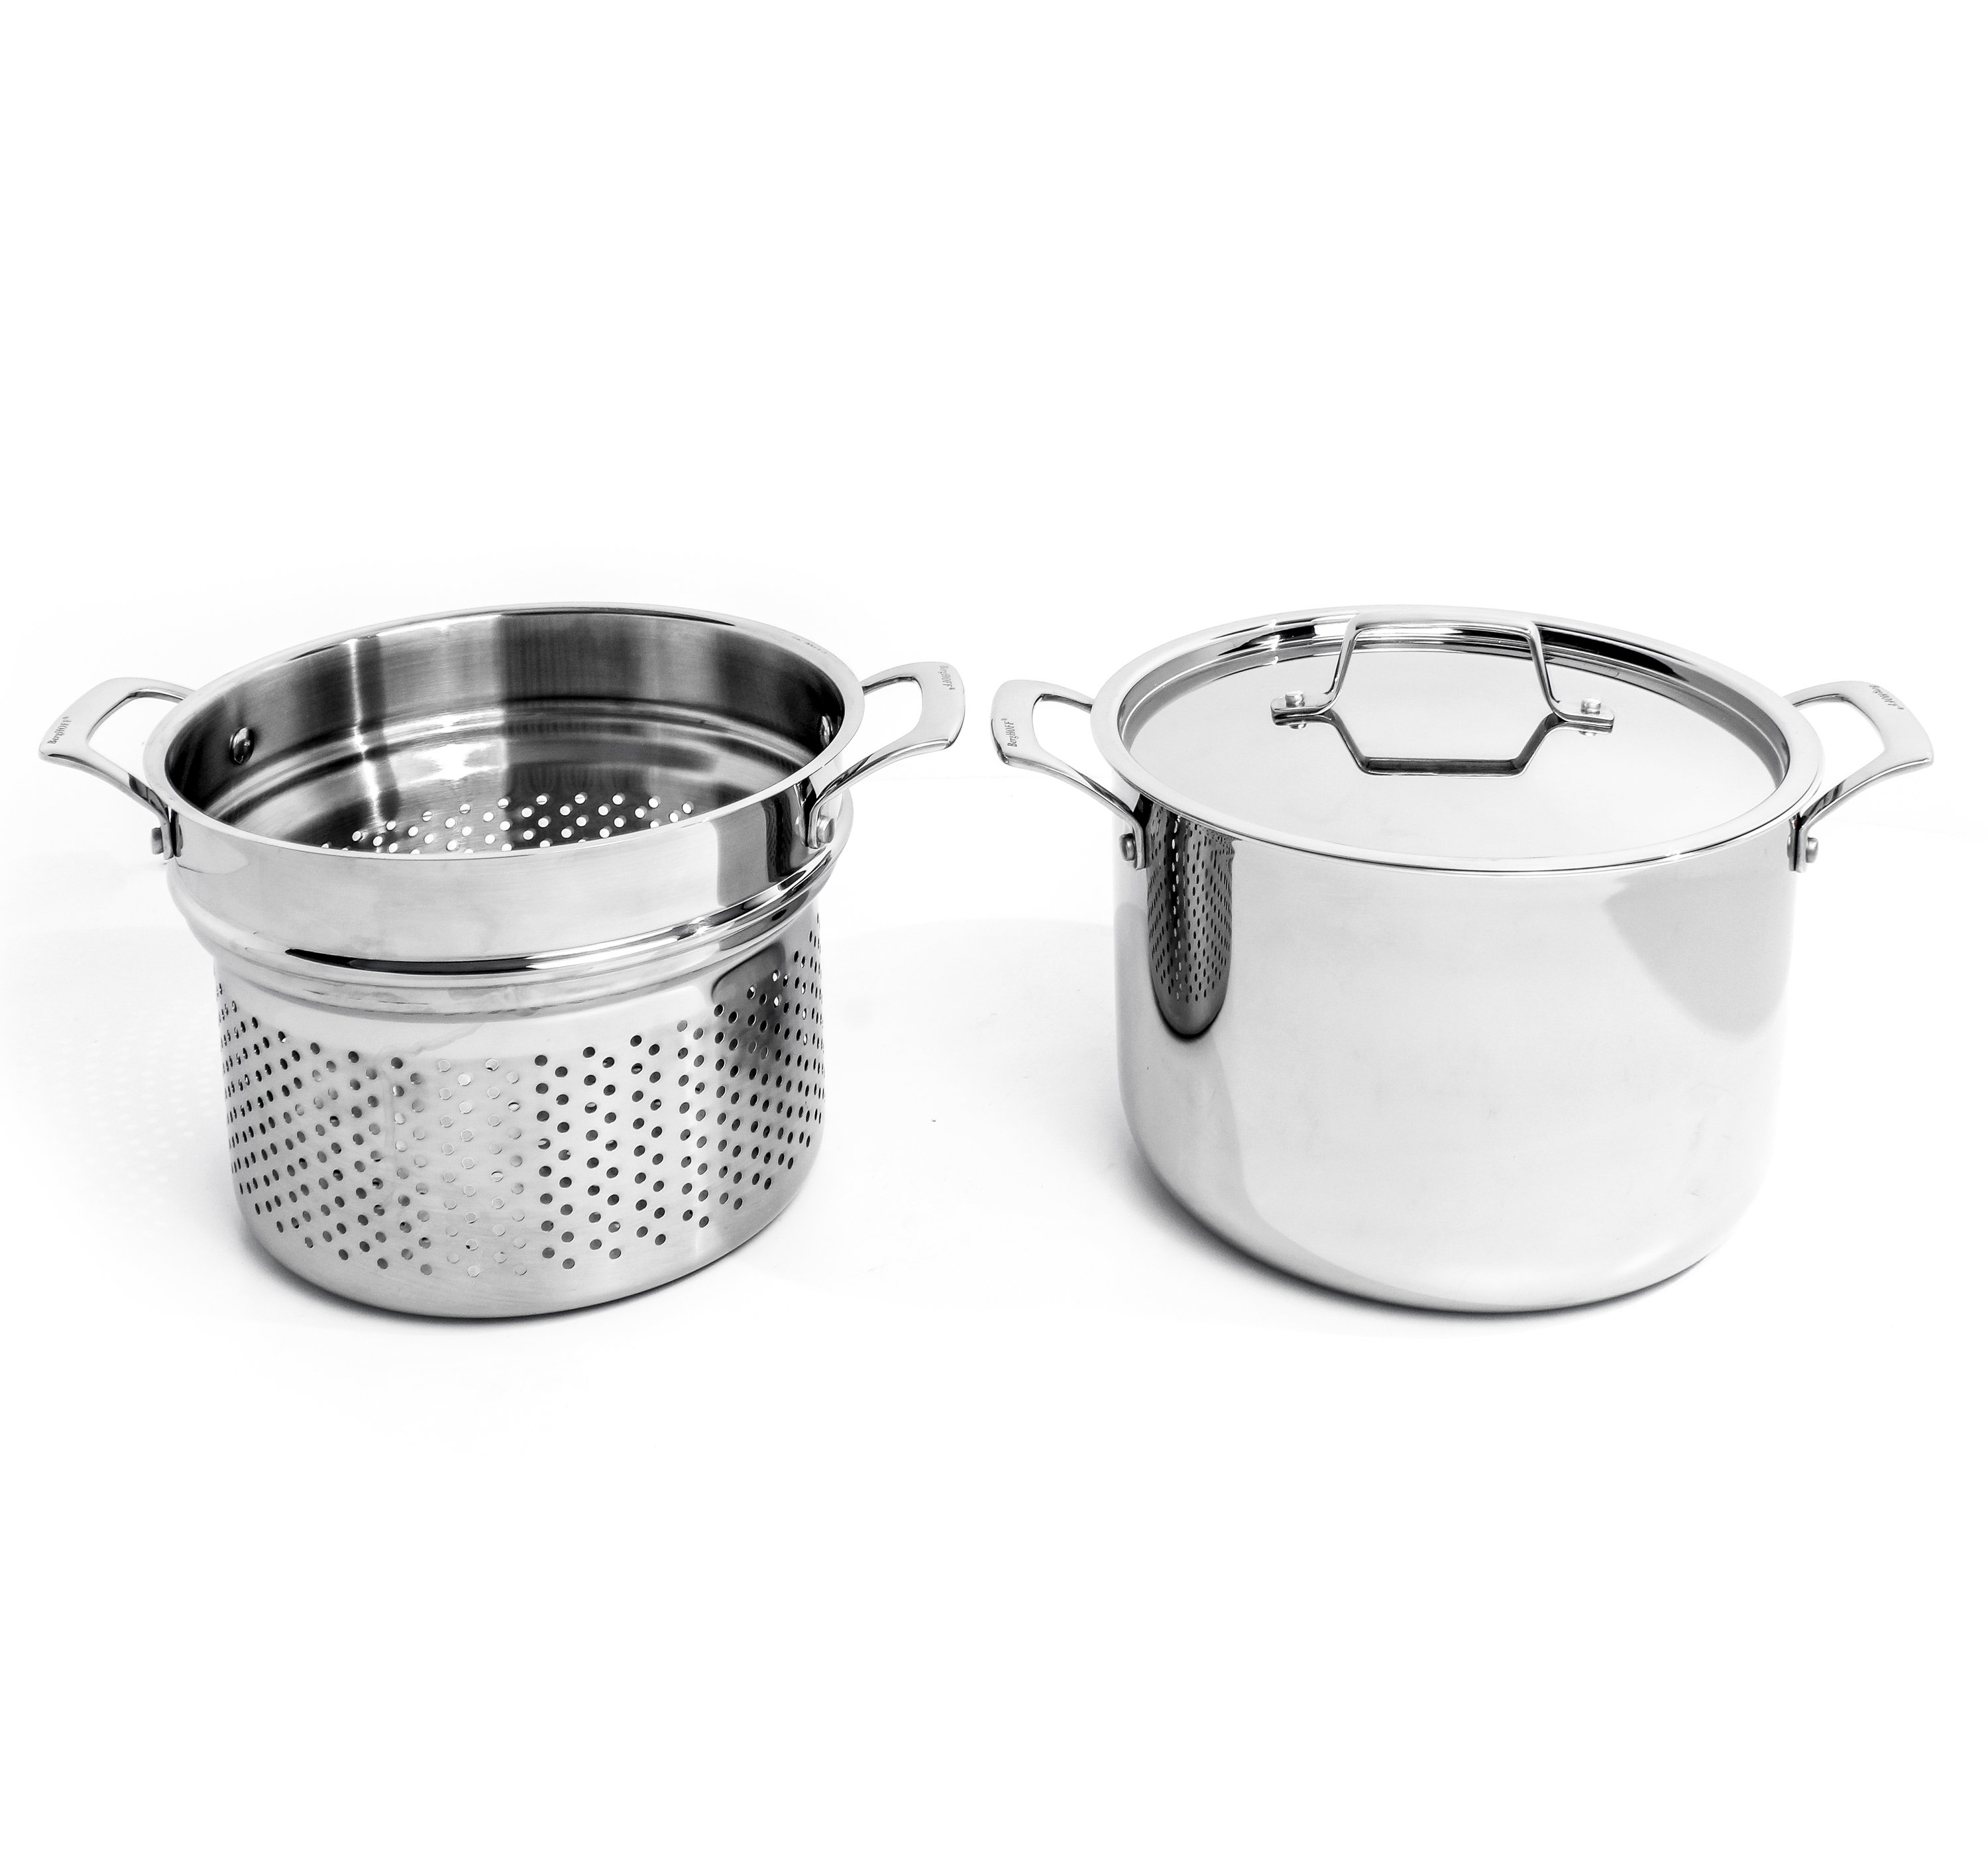  NutriChef 5-Quart Stainless Steel Stockpot - 18/8 Food